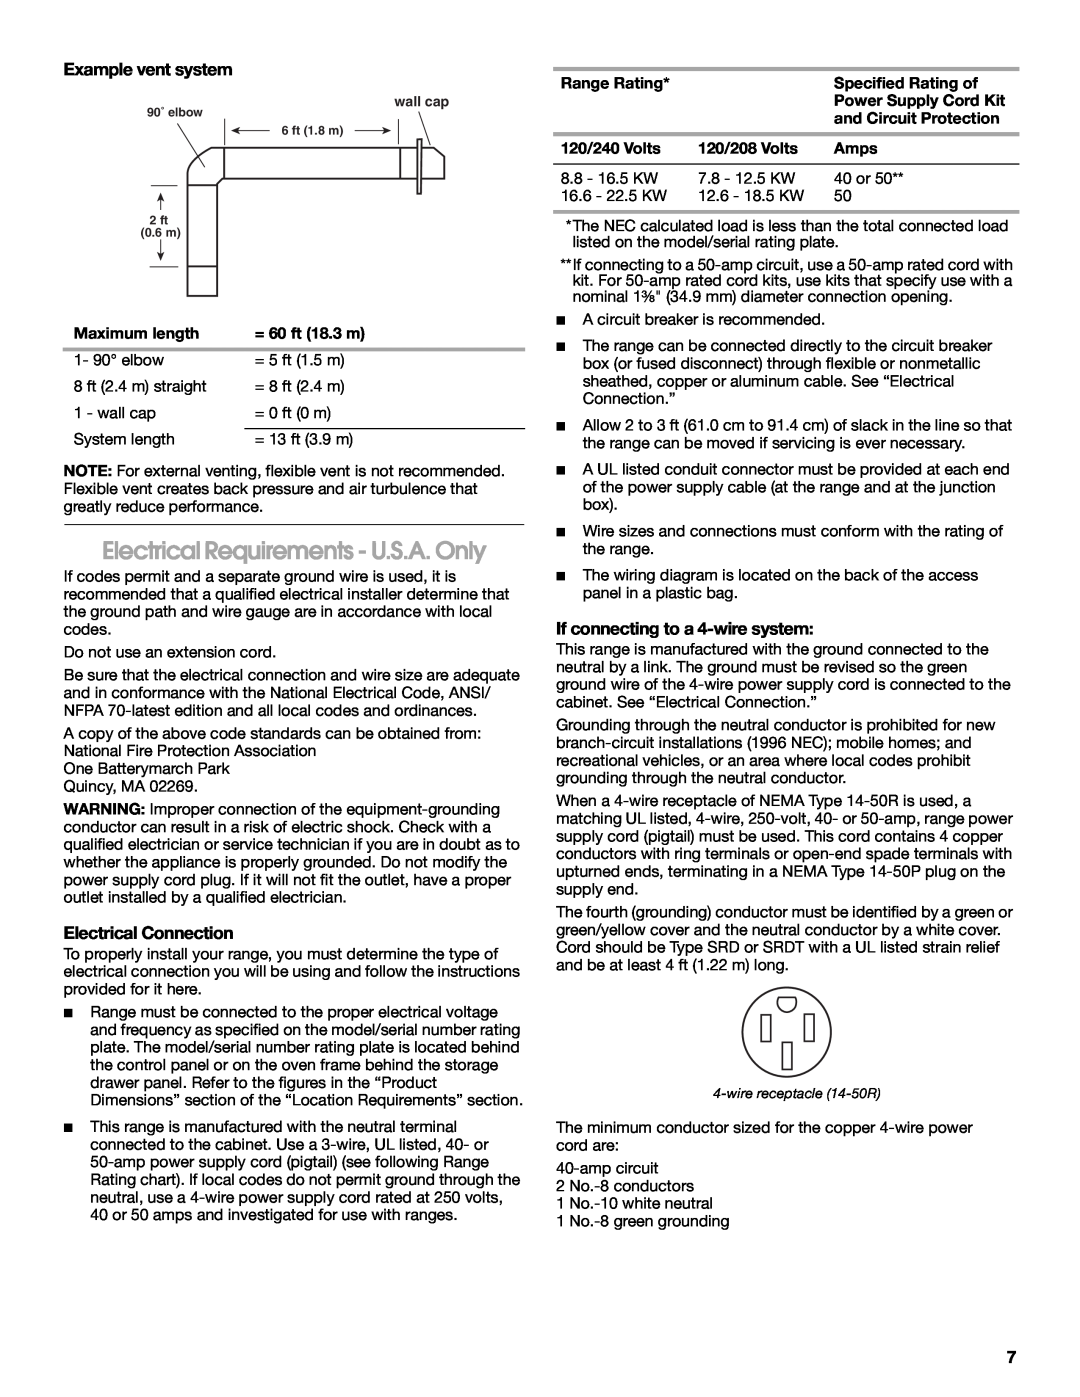 Jenn-Air W10253462A Electrical Requirements - U.S.A. Only, Example vent system, Electrical Connection 